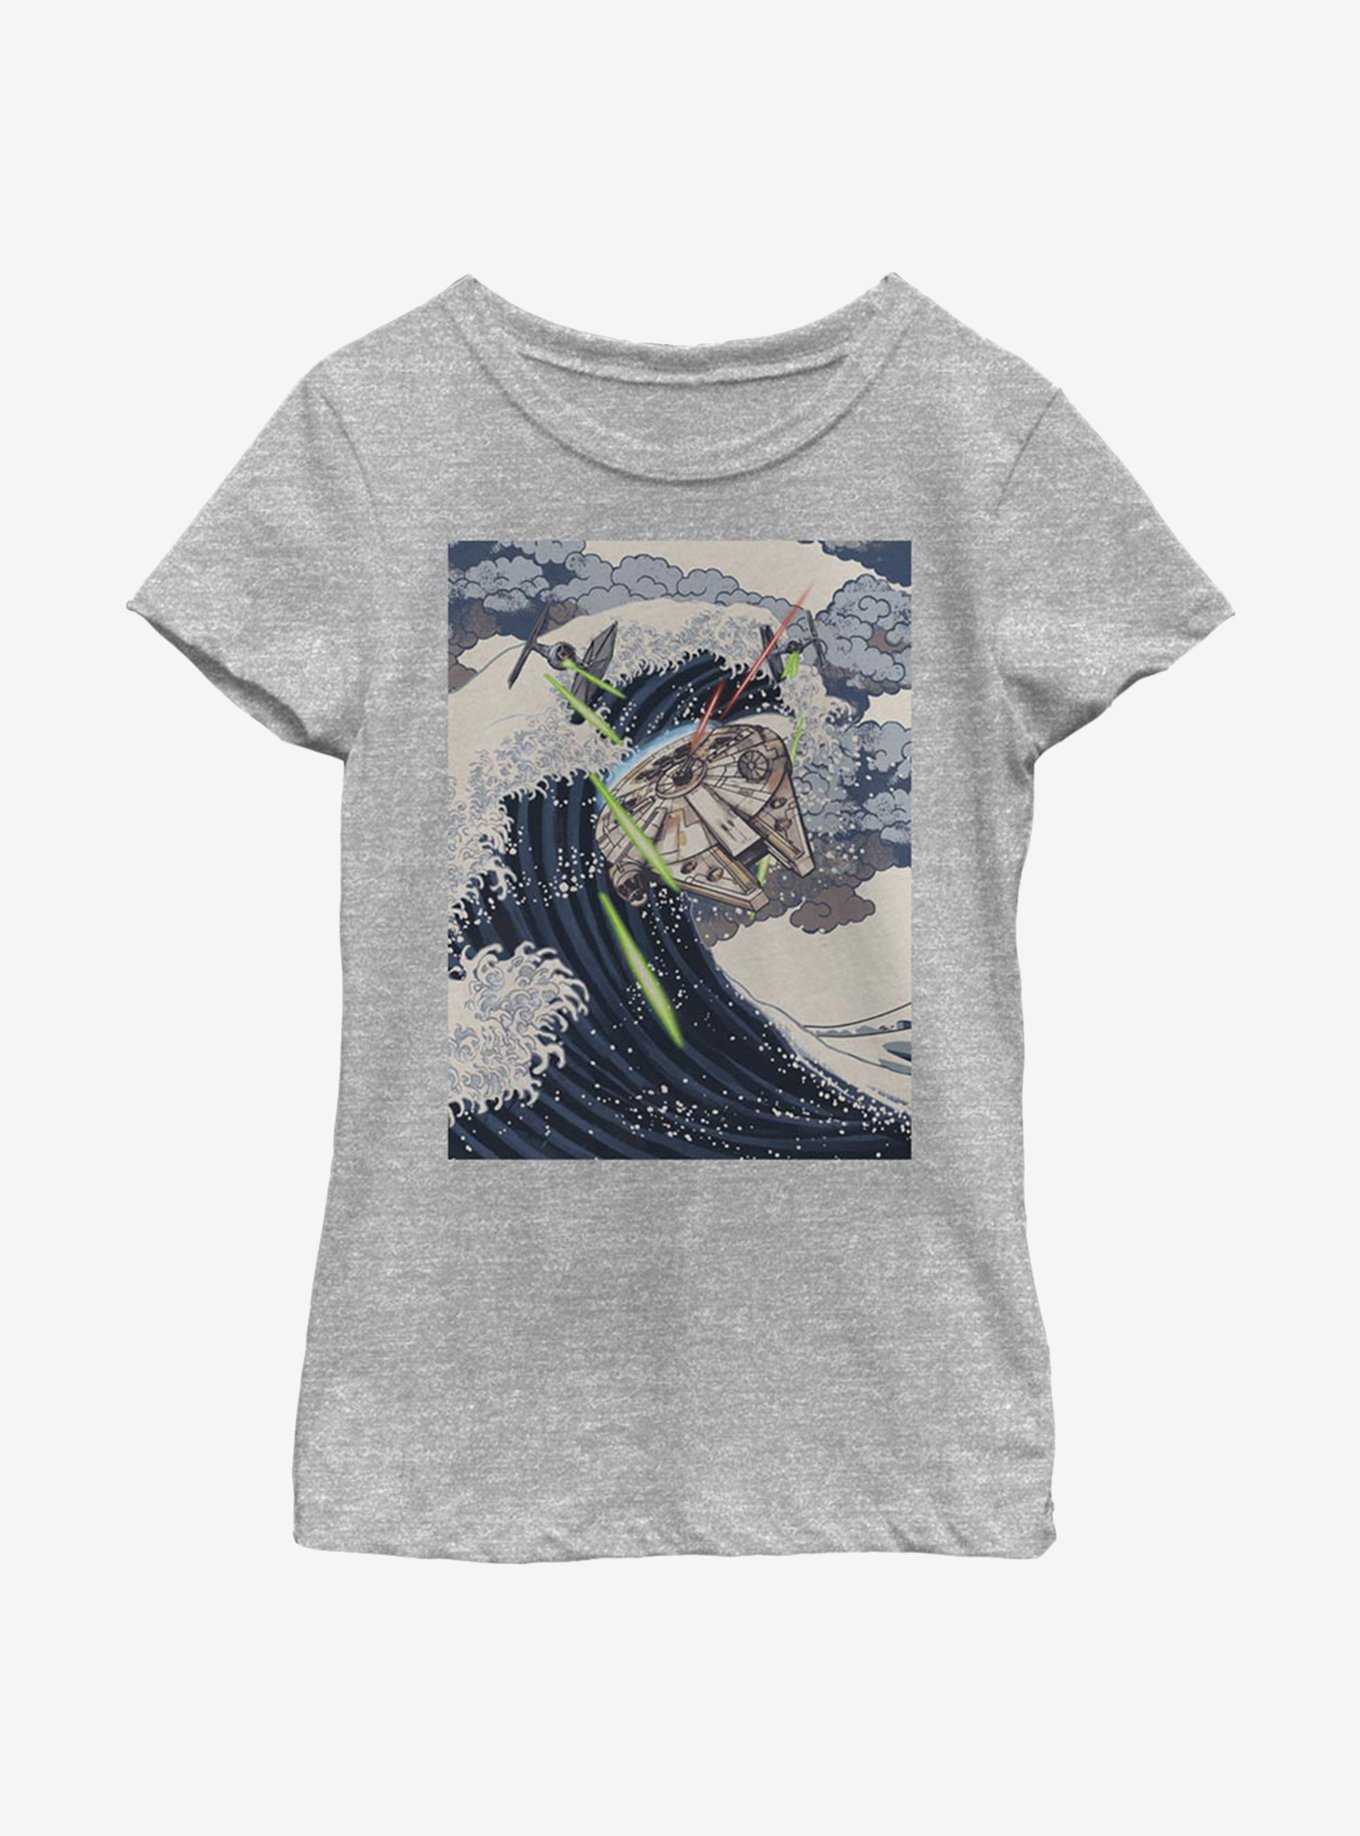 Star Wars Space Wave Youth Girls T-Shirt, , hi-res